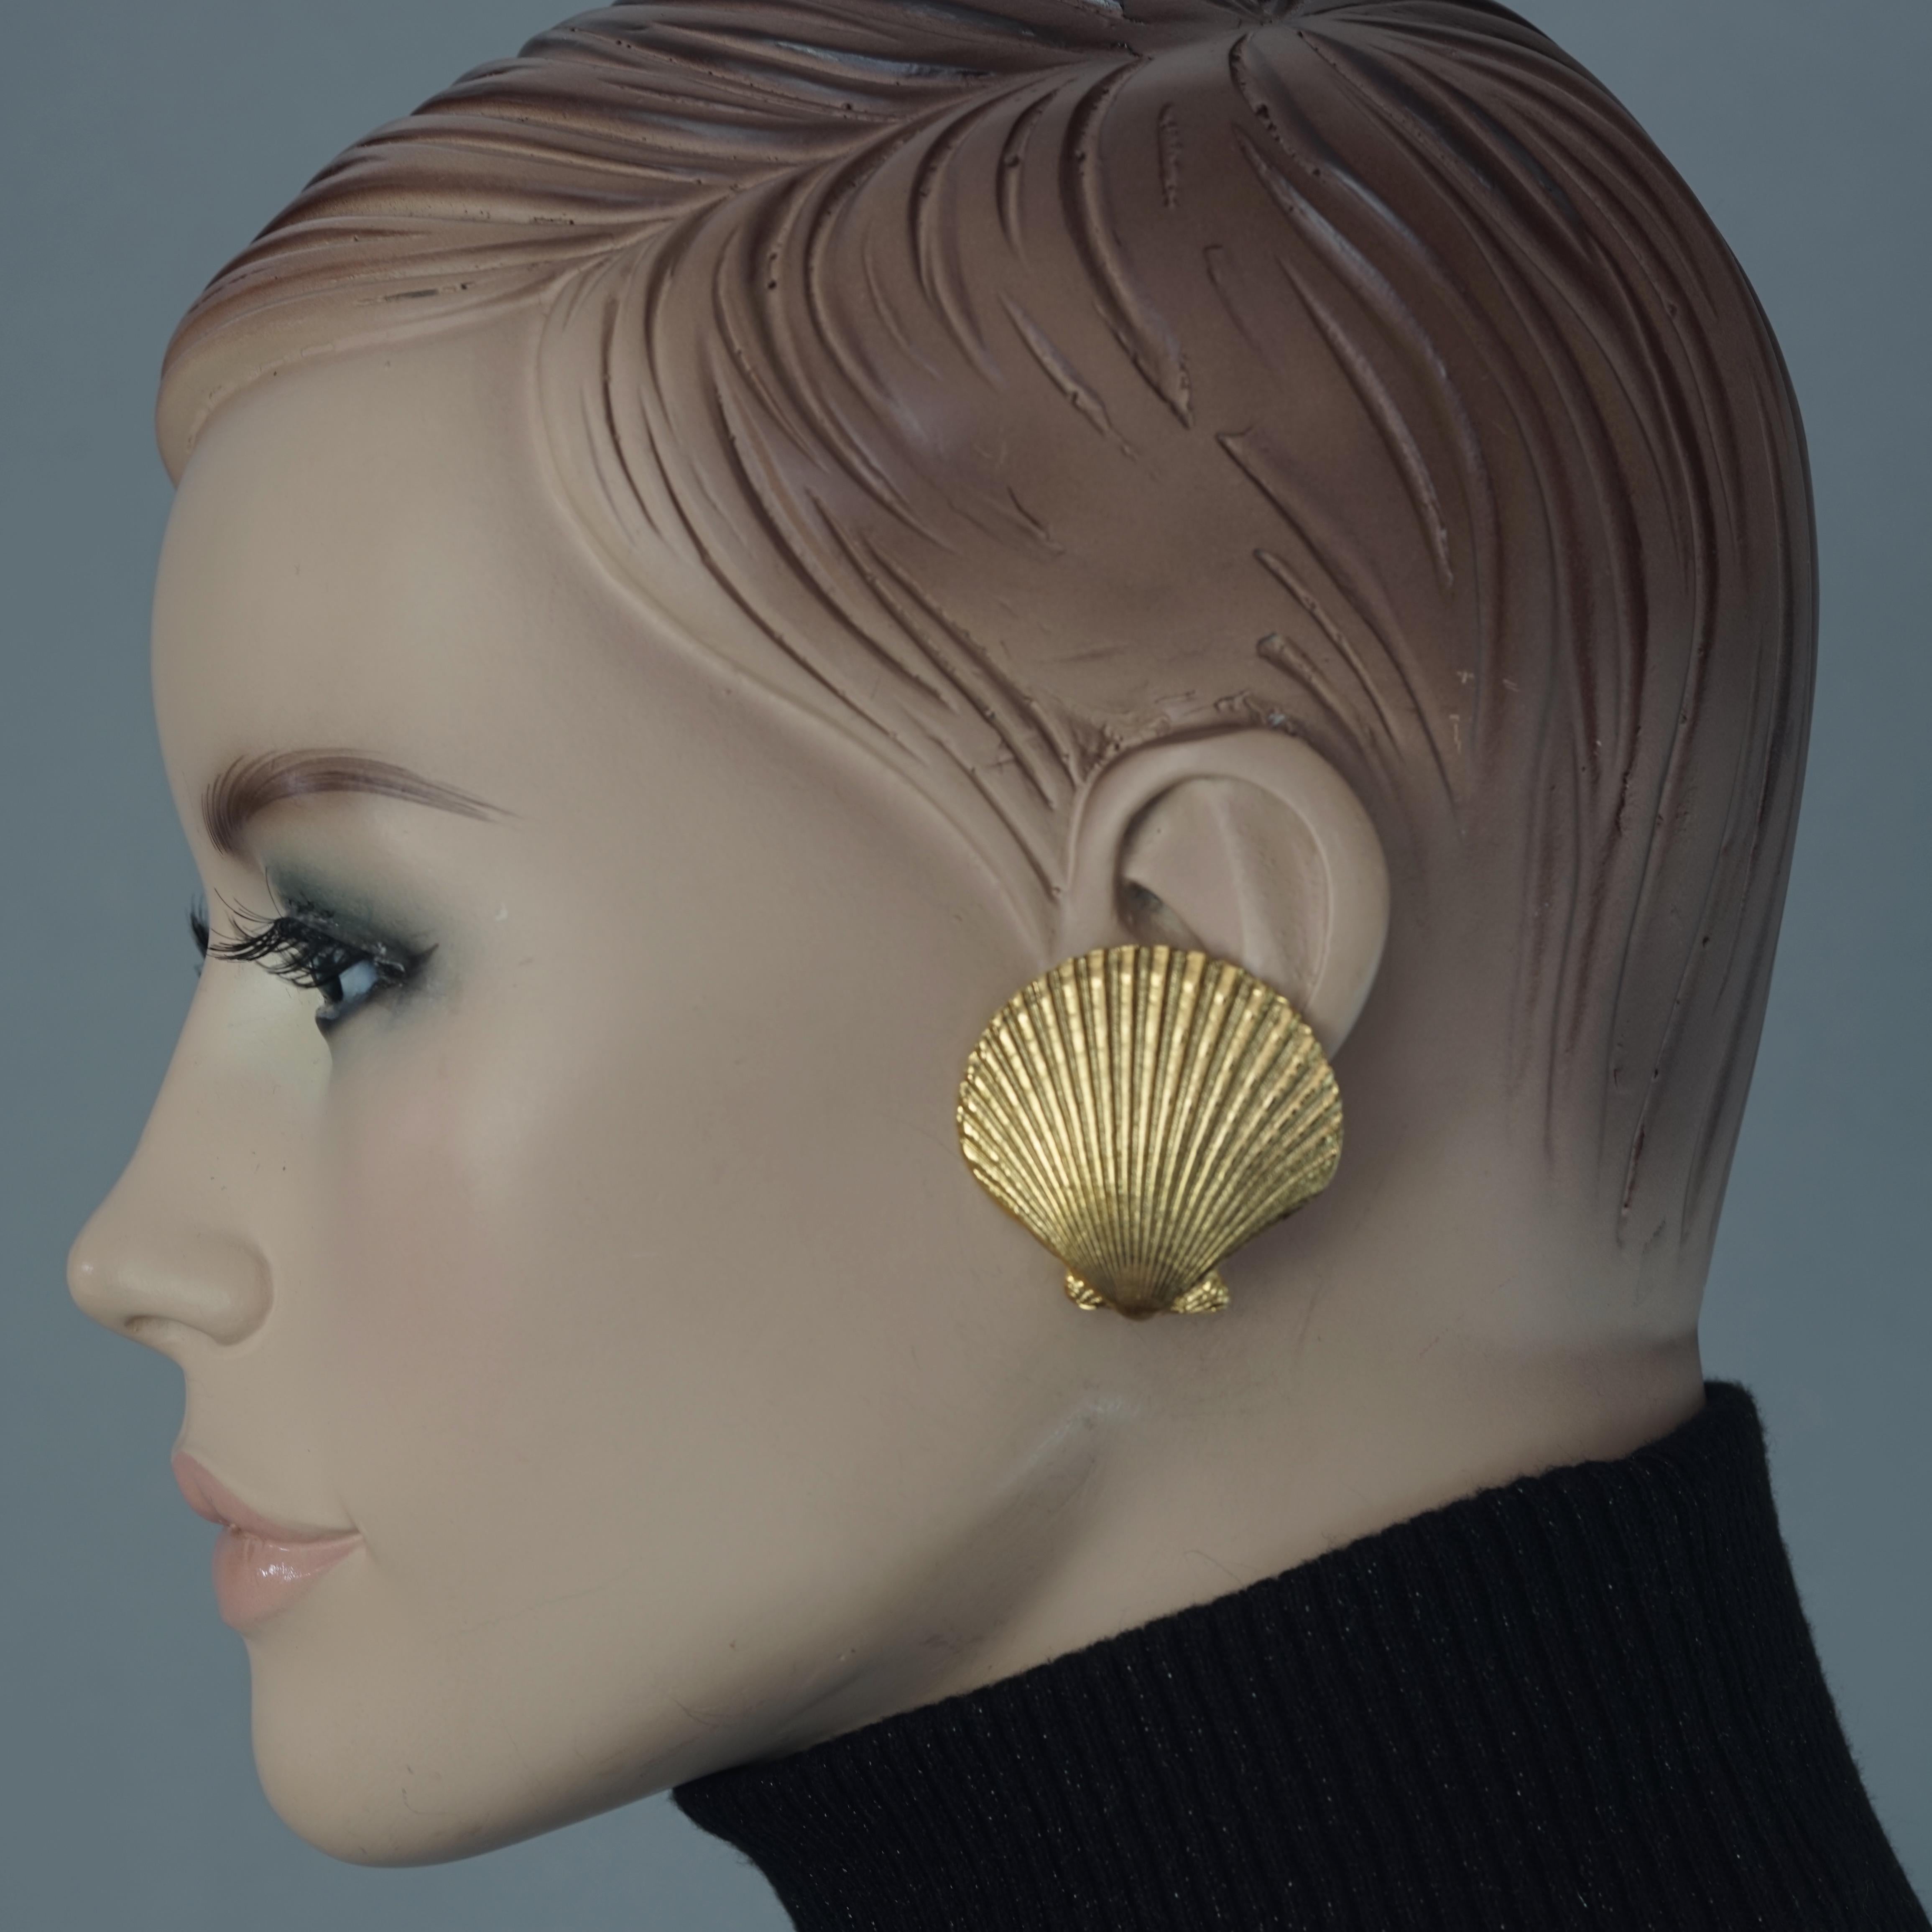 Vintage YVES SAINT LAURENT Ysl Golden Shell Earrings

Measurements:
Height: 1.57 inches (4 cm)
Width: 1.57 inches (4 cm)
Weight per Earring: 13 grams

Features:
- 100% Authentic YVES SAINT LAURENT.
- Textured clam shell shape earrings.
- Gold